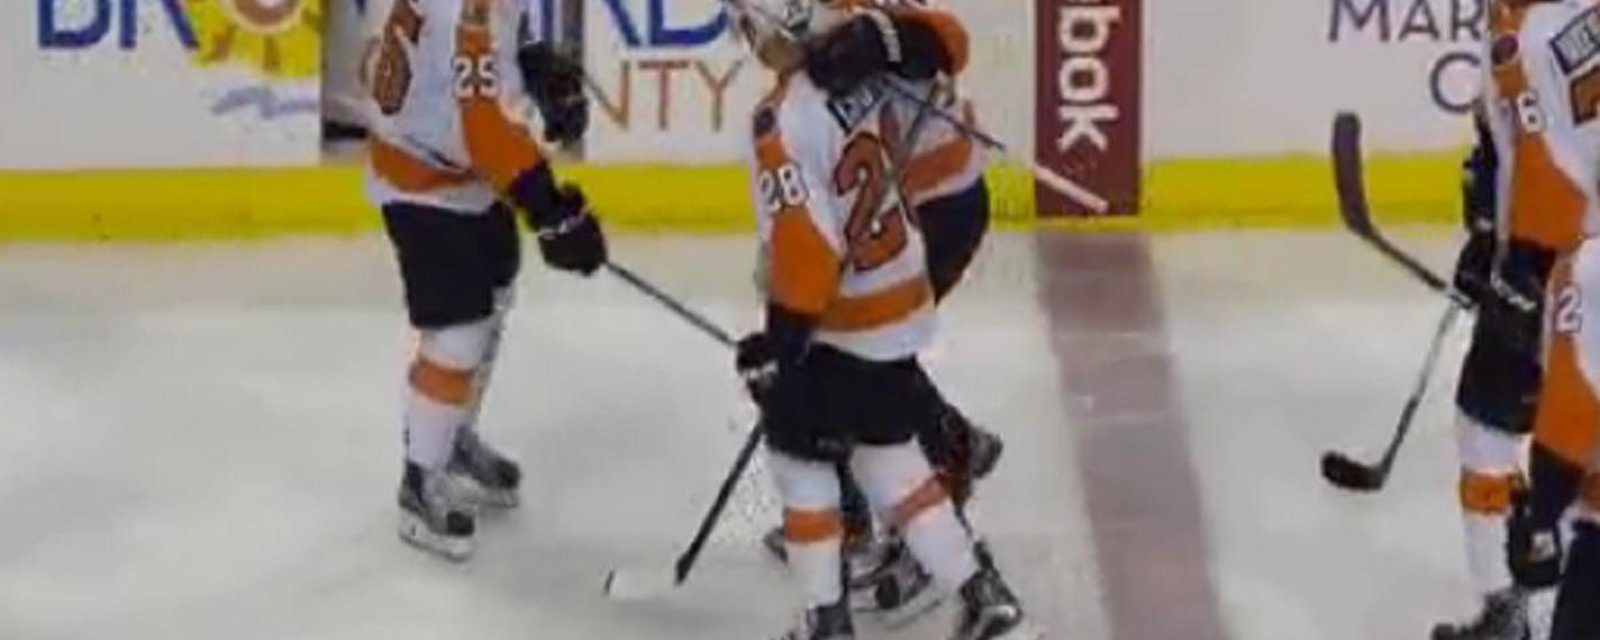 Flyers forward goes down with an injury